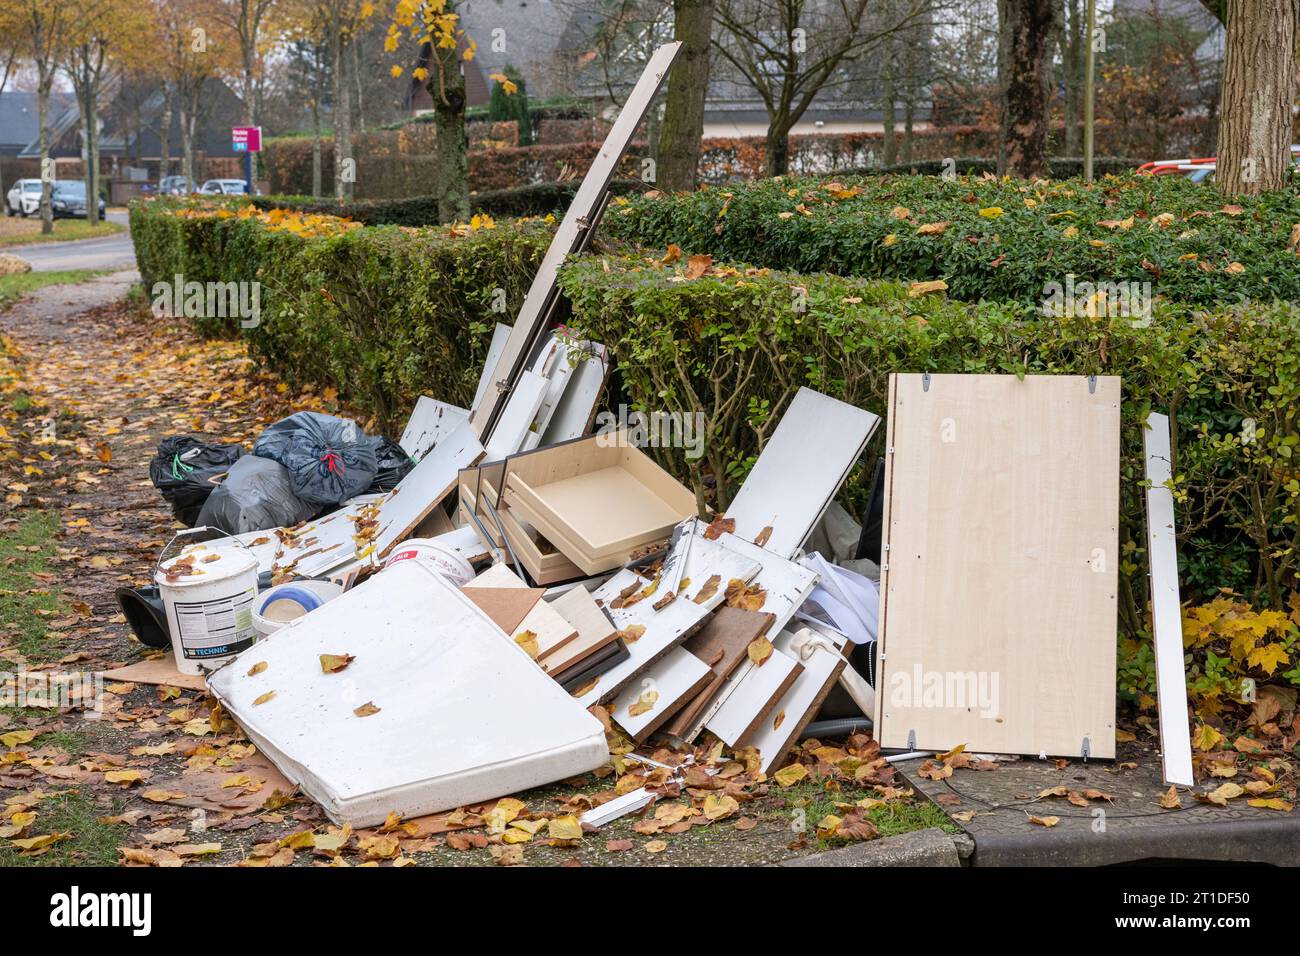 Rouen (north-western France): illegal dumping of construction waste on the public highway Stock Photo